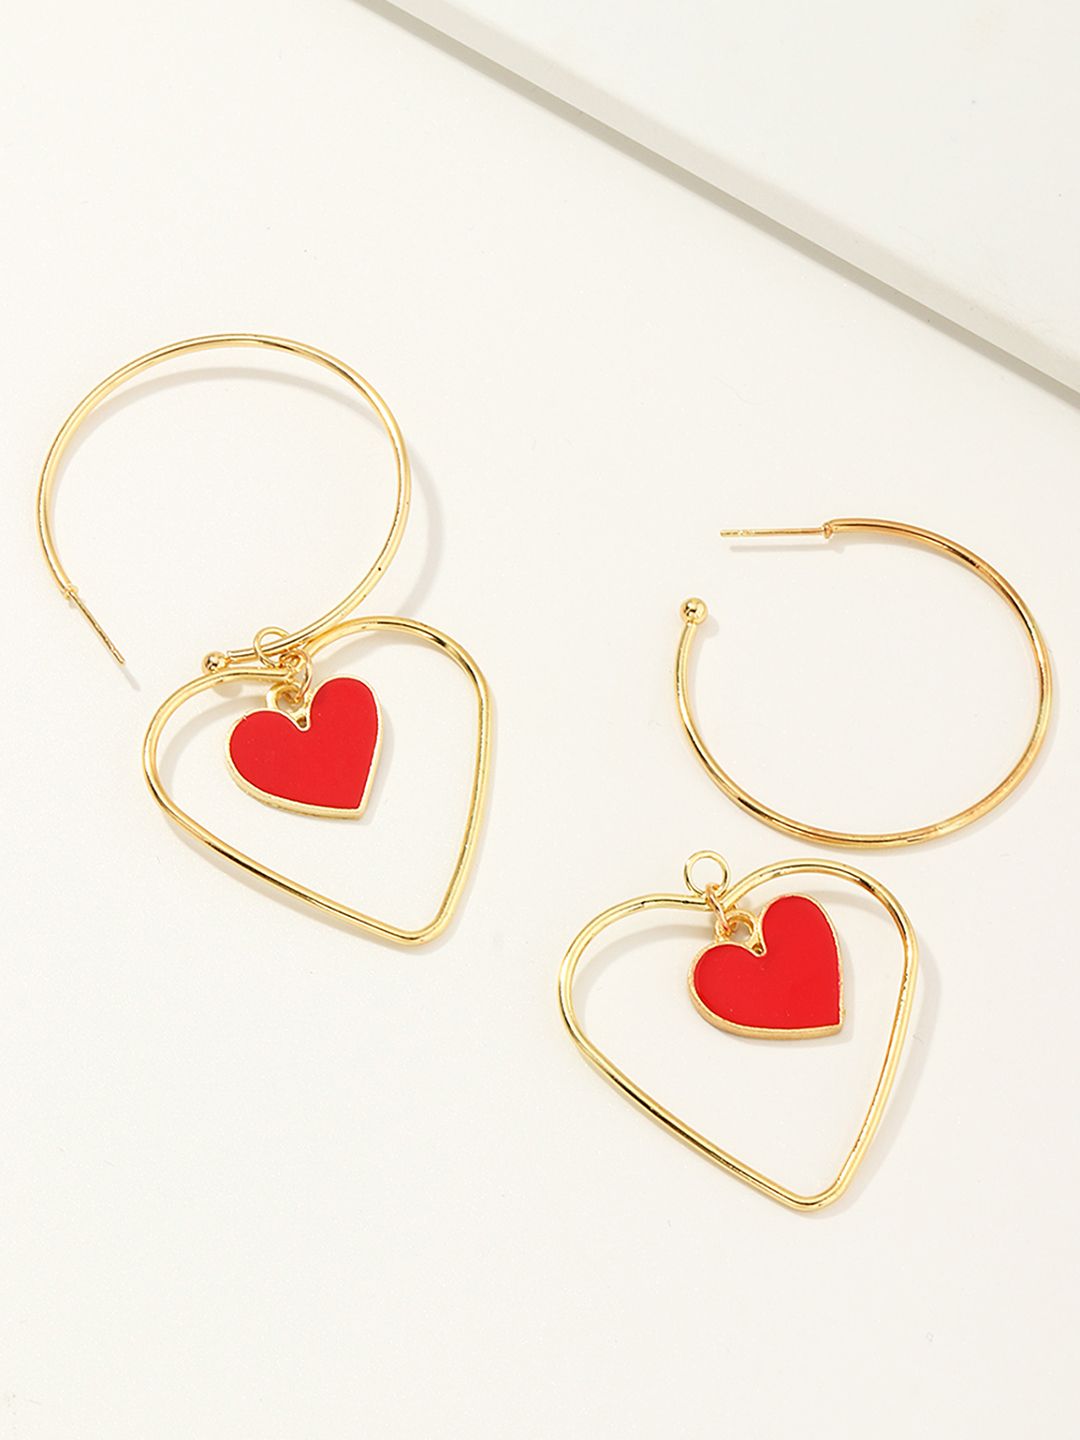 URBANIC Gold-Toned & Red Heart Shaped Drop Earrings Price in India